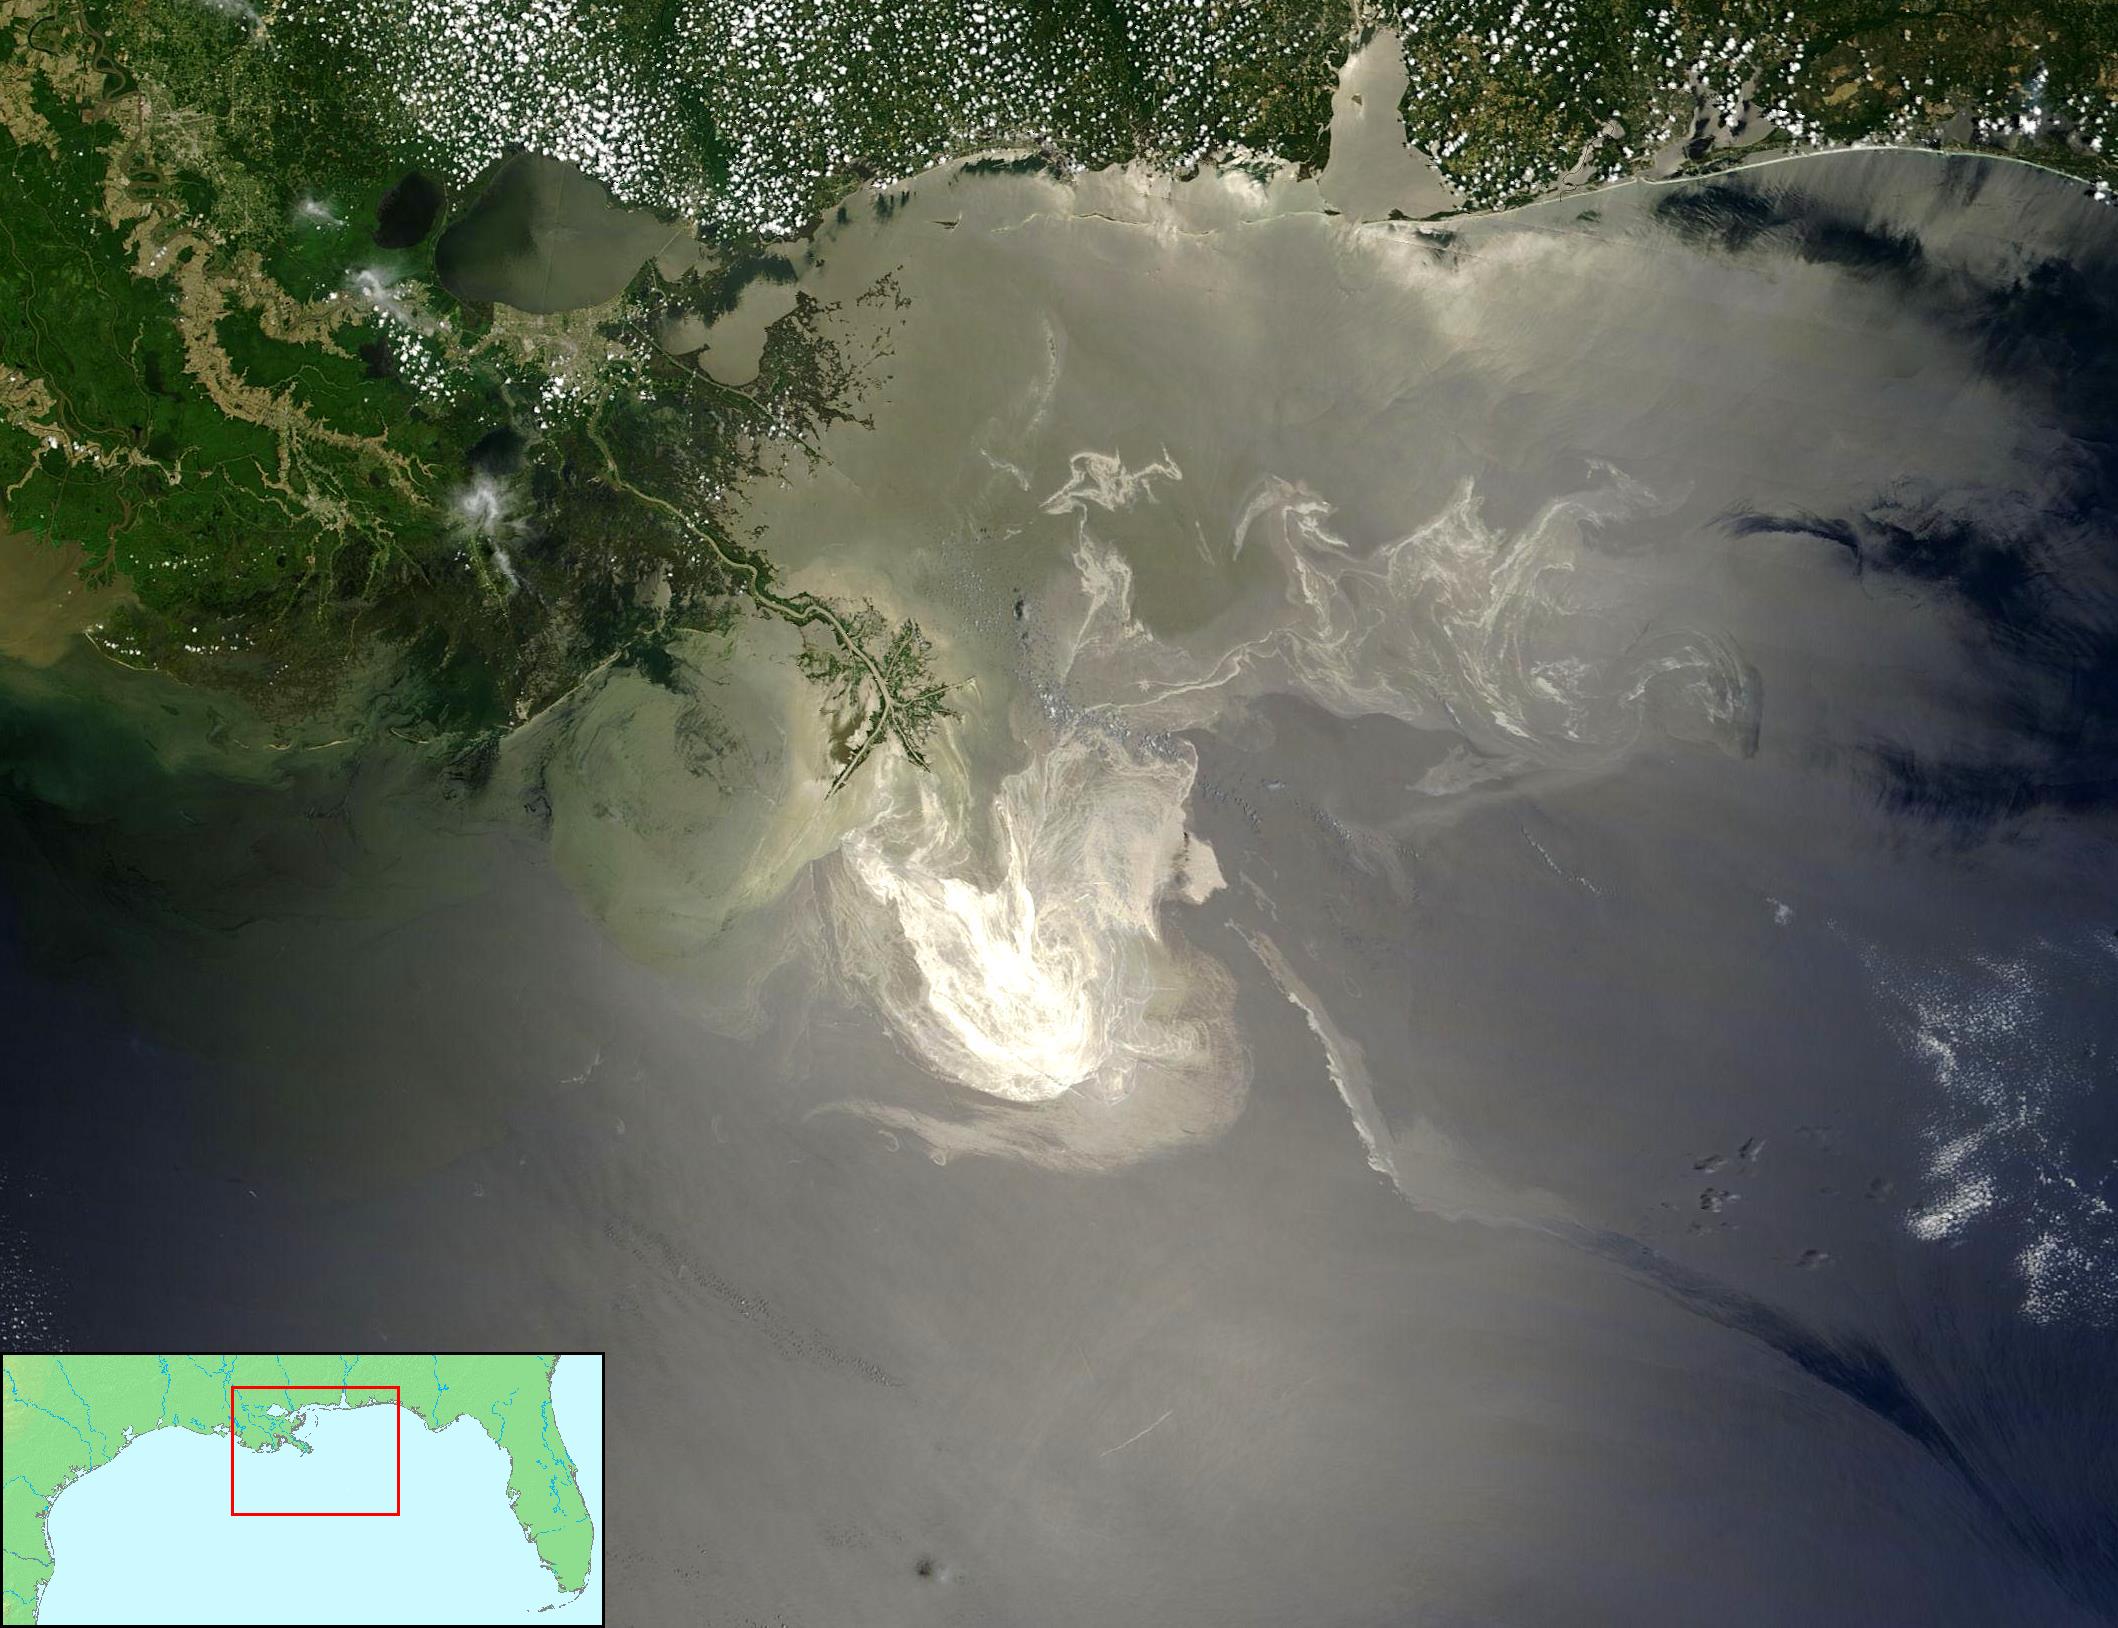 A blanket of oil: the role of bacteria in cleaning up after Deepwater Horizon